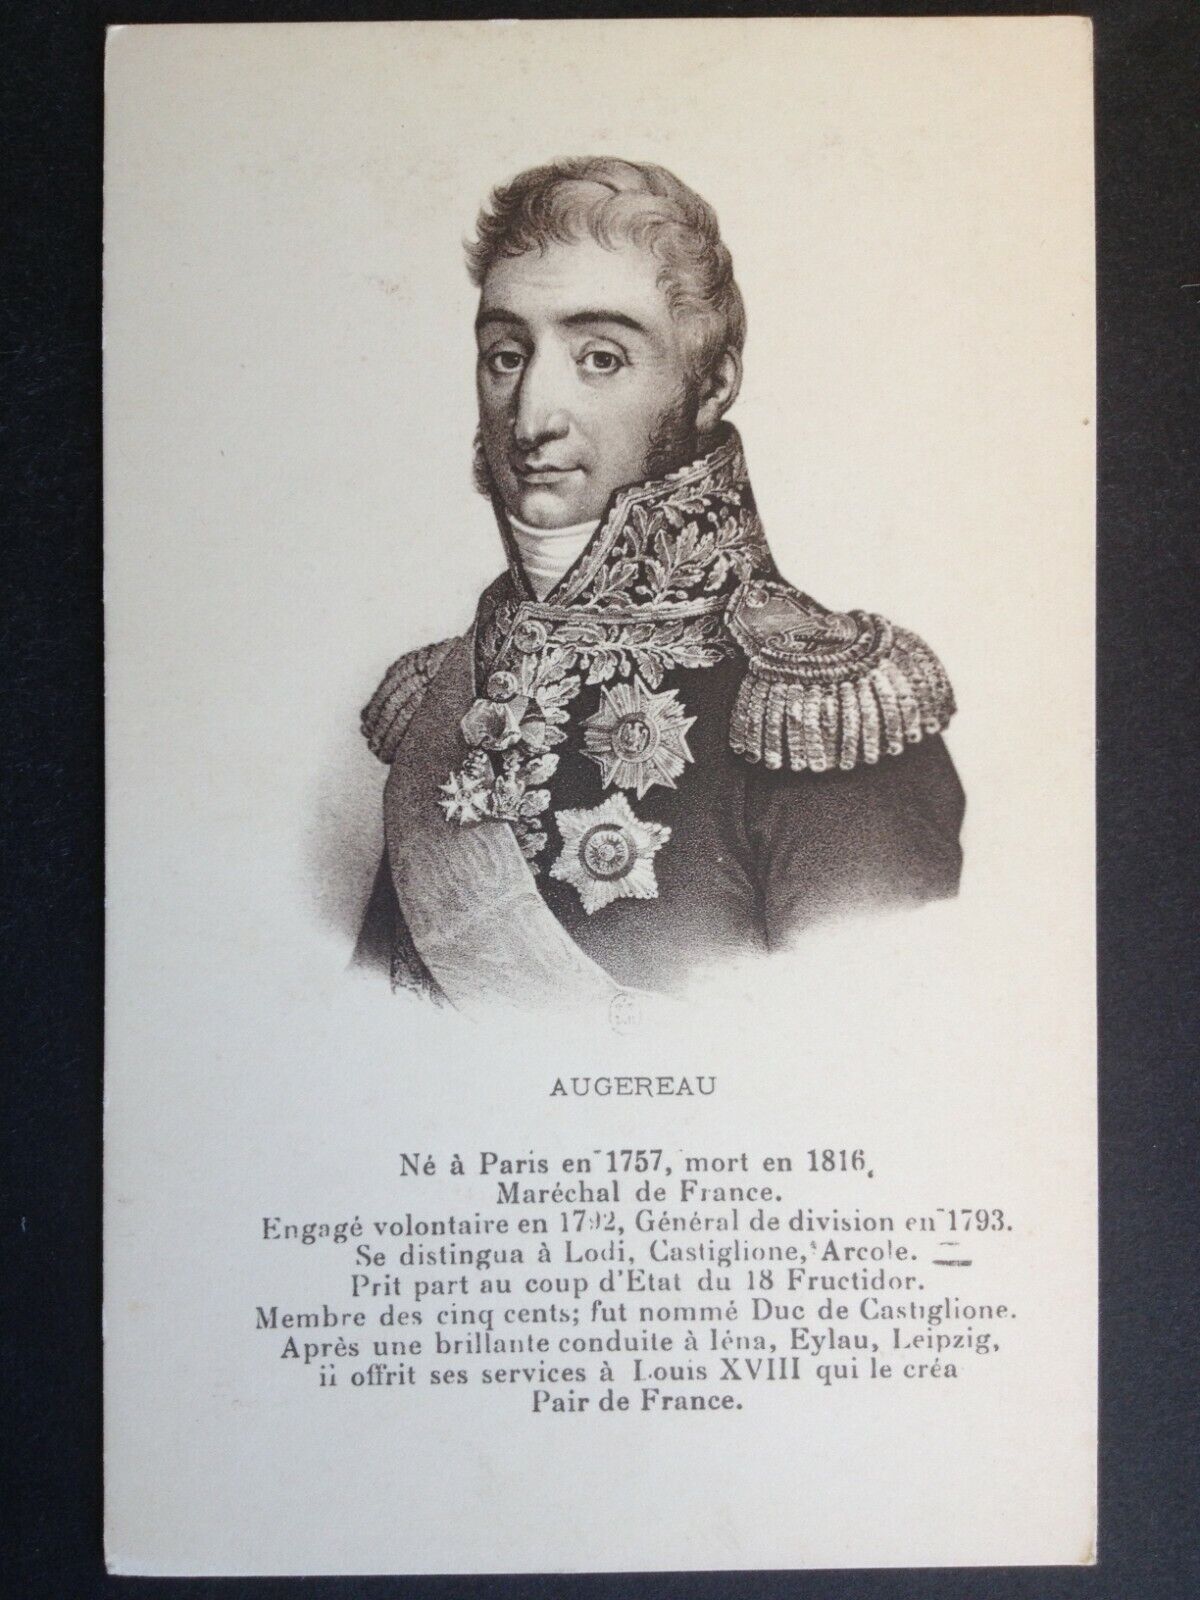 CPA litho print portrait of pierre stempel marshal of France the proud tealeaf